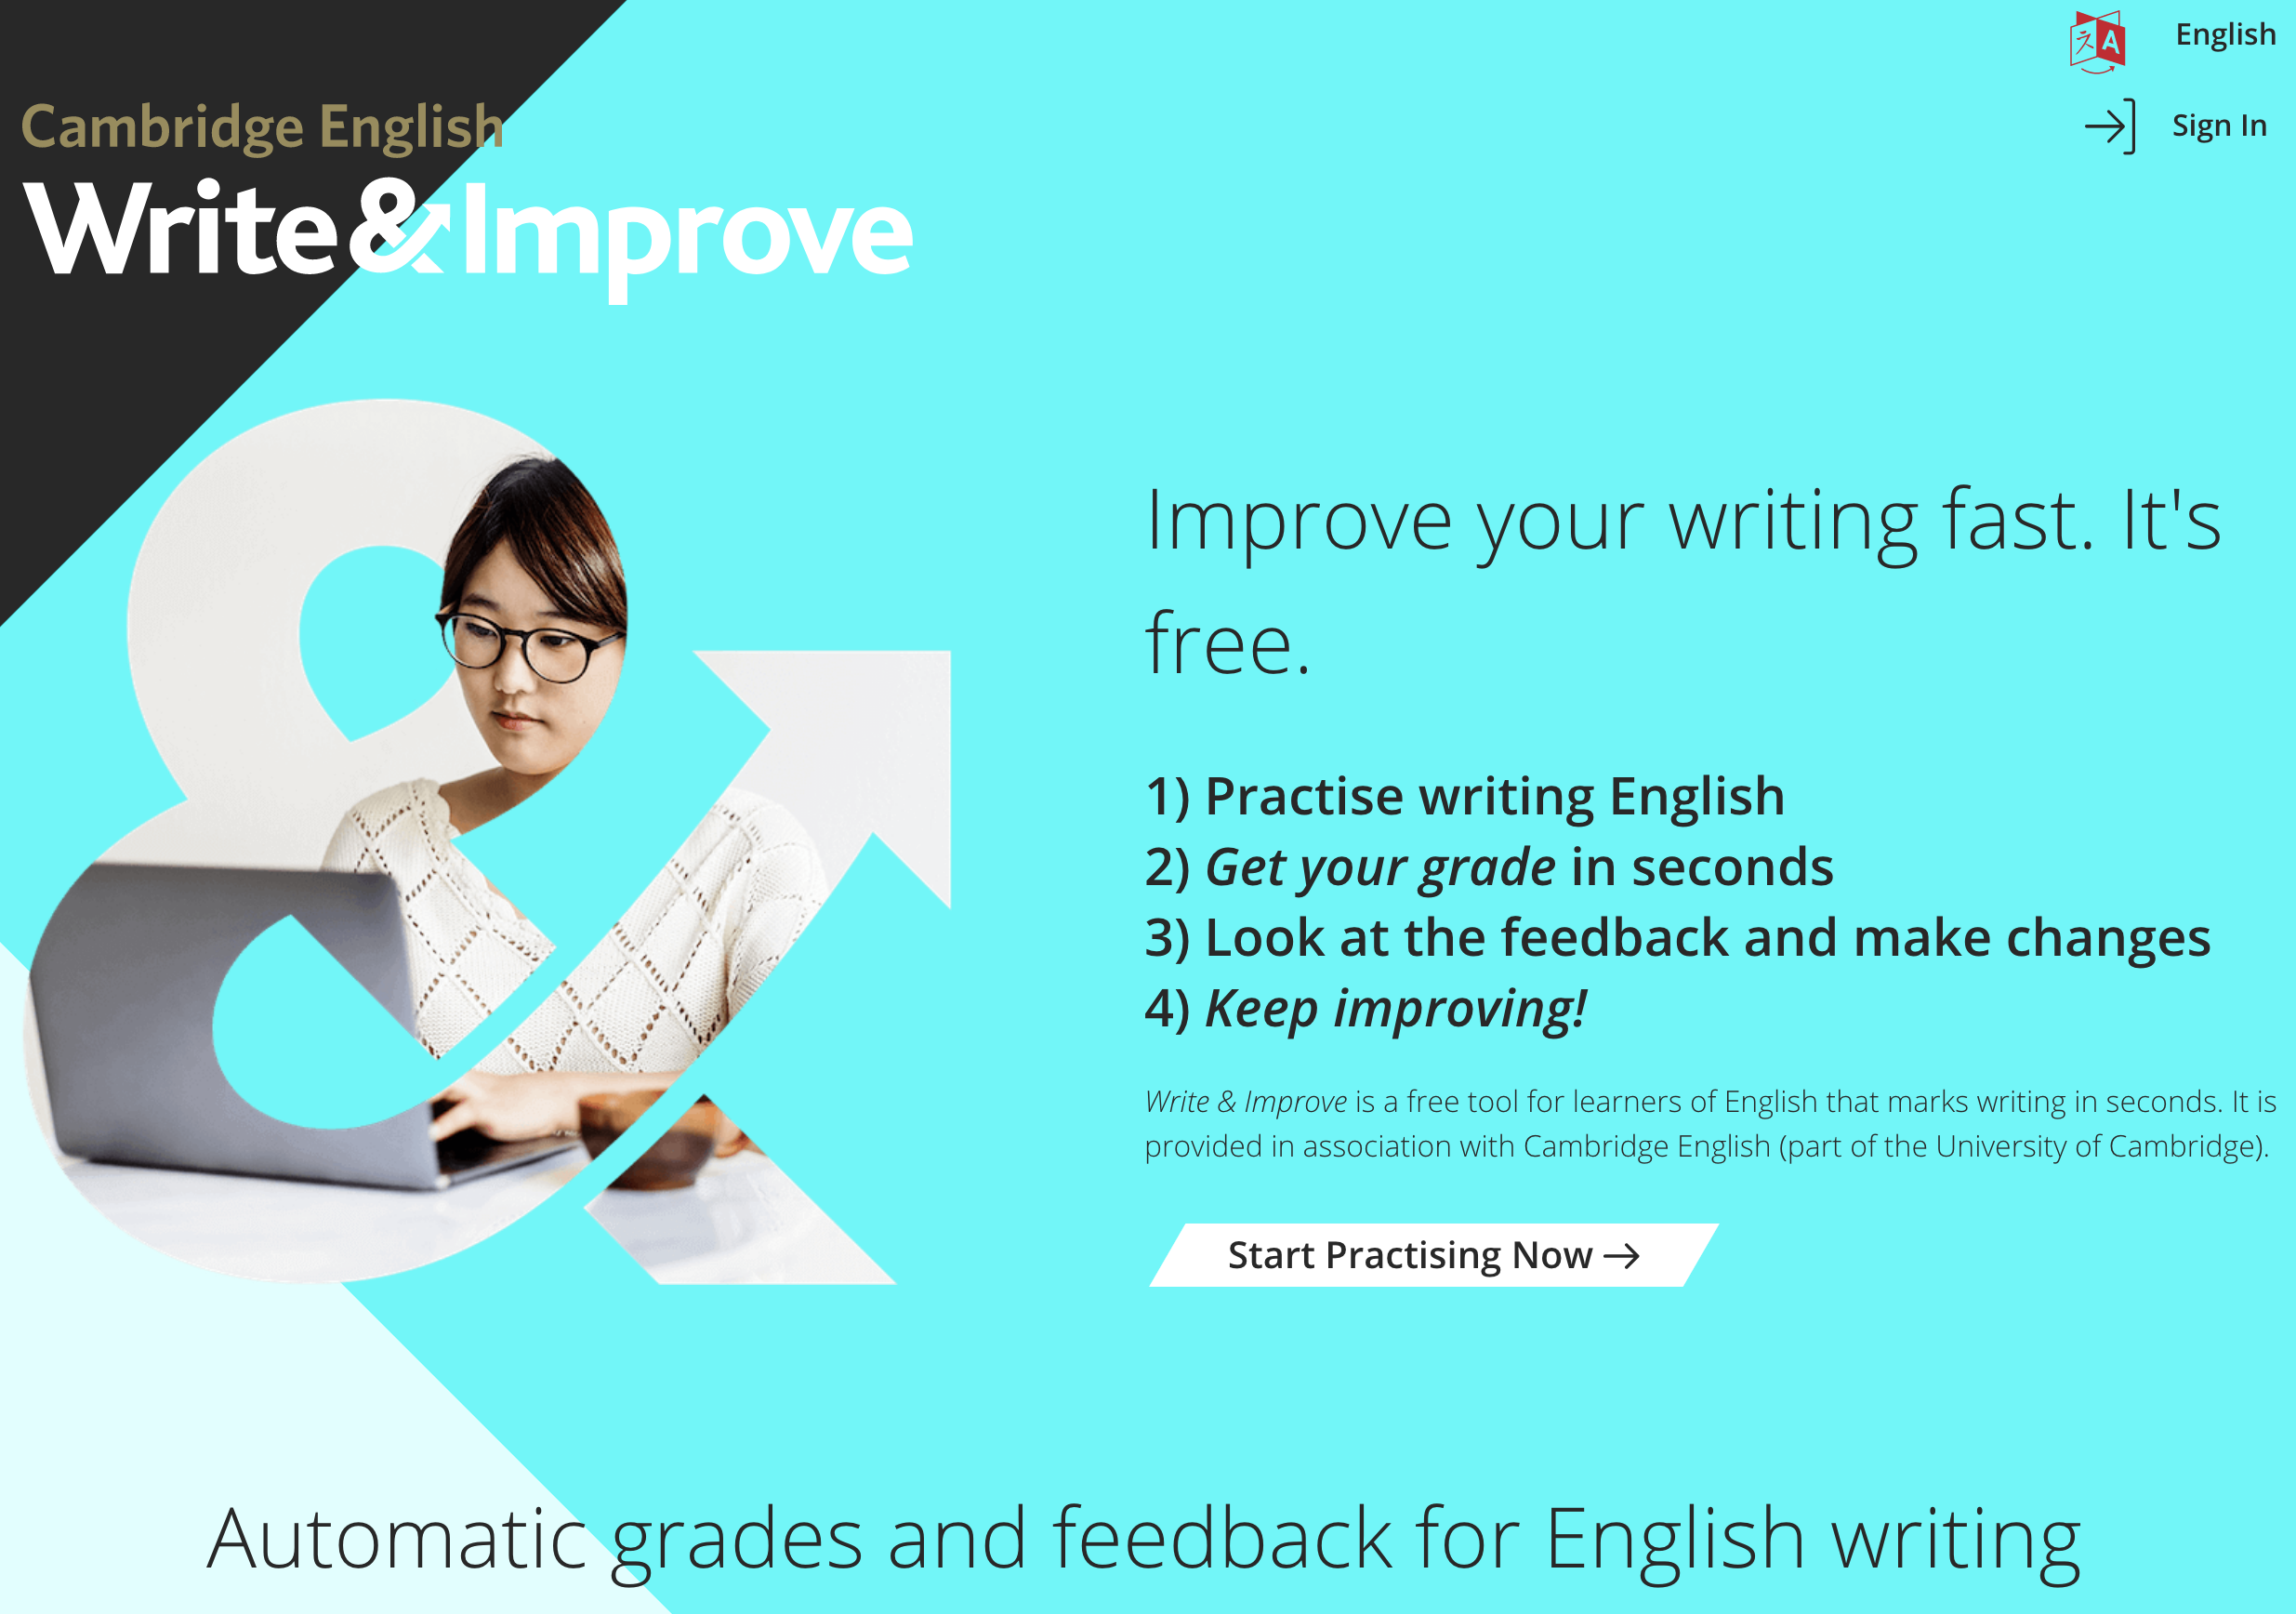 Get feedback on your writing in seconds. It's free. By Cambridge